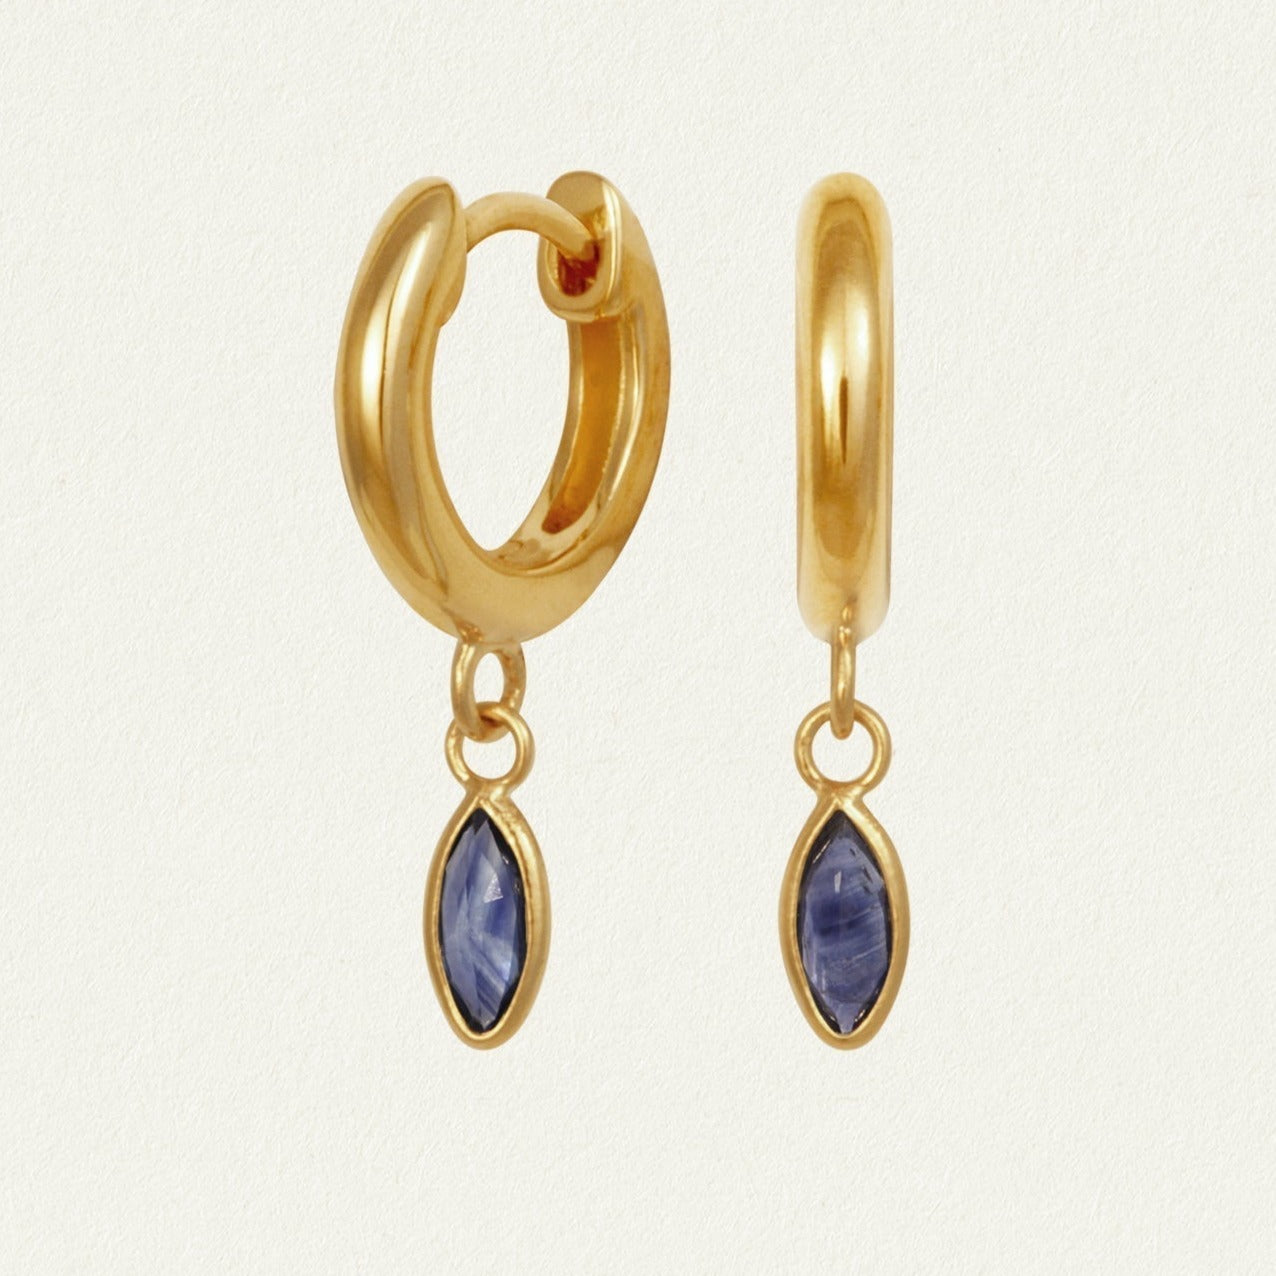 Temple of the Sun Alessandra Ioite Earrings, Gold